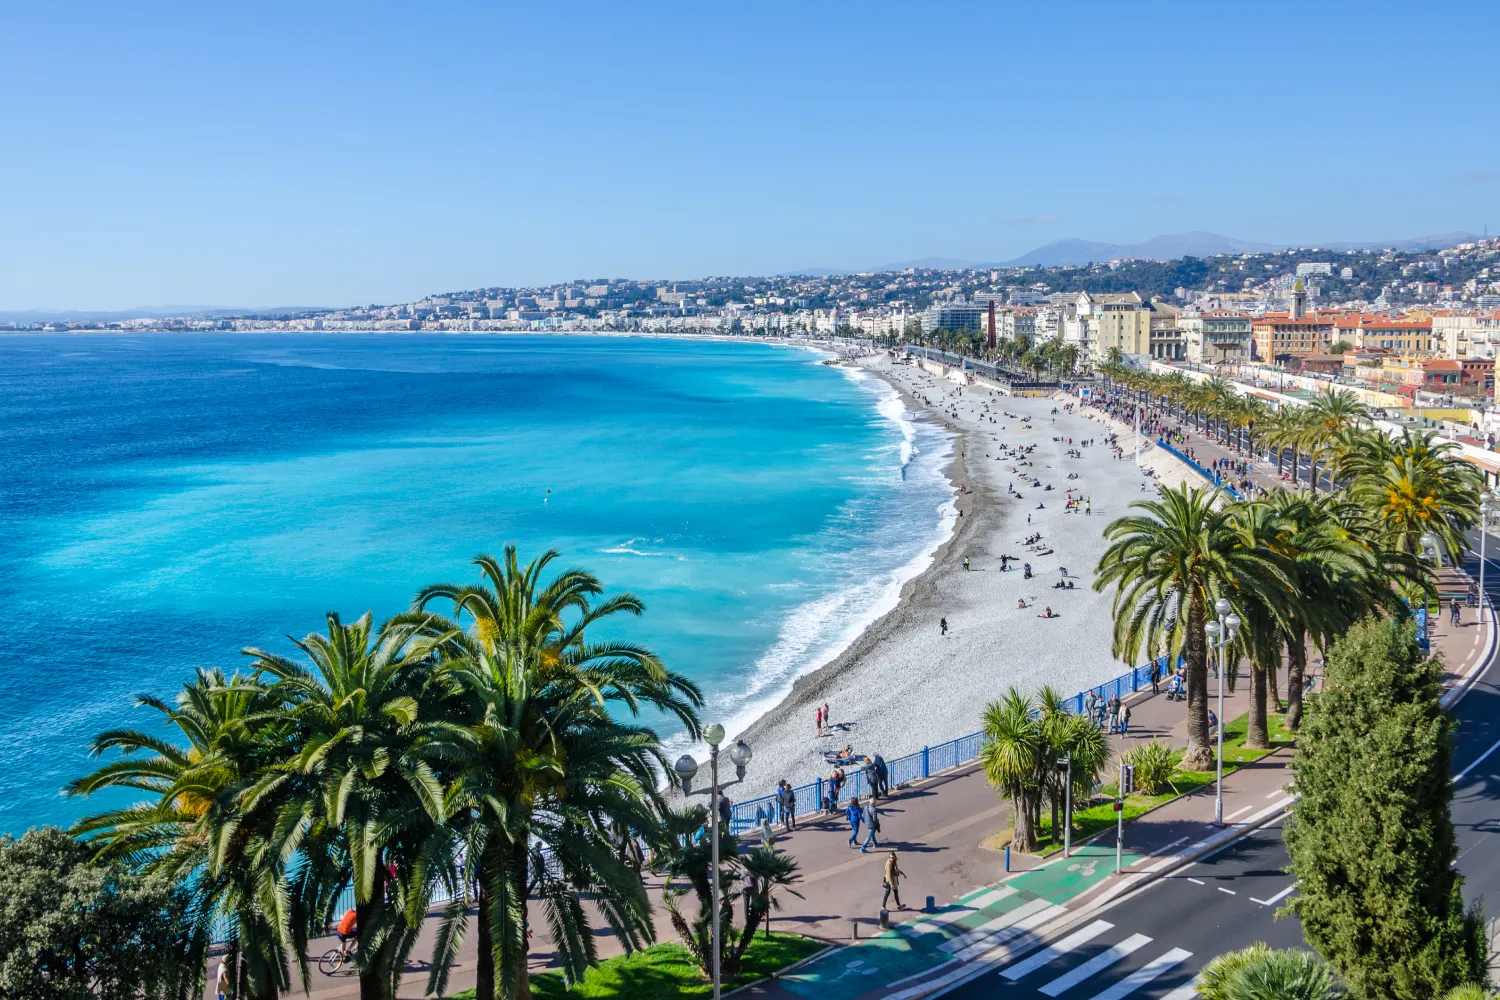 Aerial view Of The Bay Of Angels in Nice. Pine trees and people walking and sunbathing on the shore